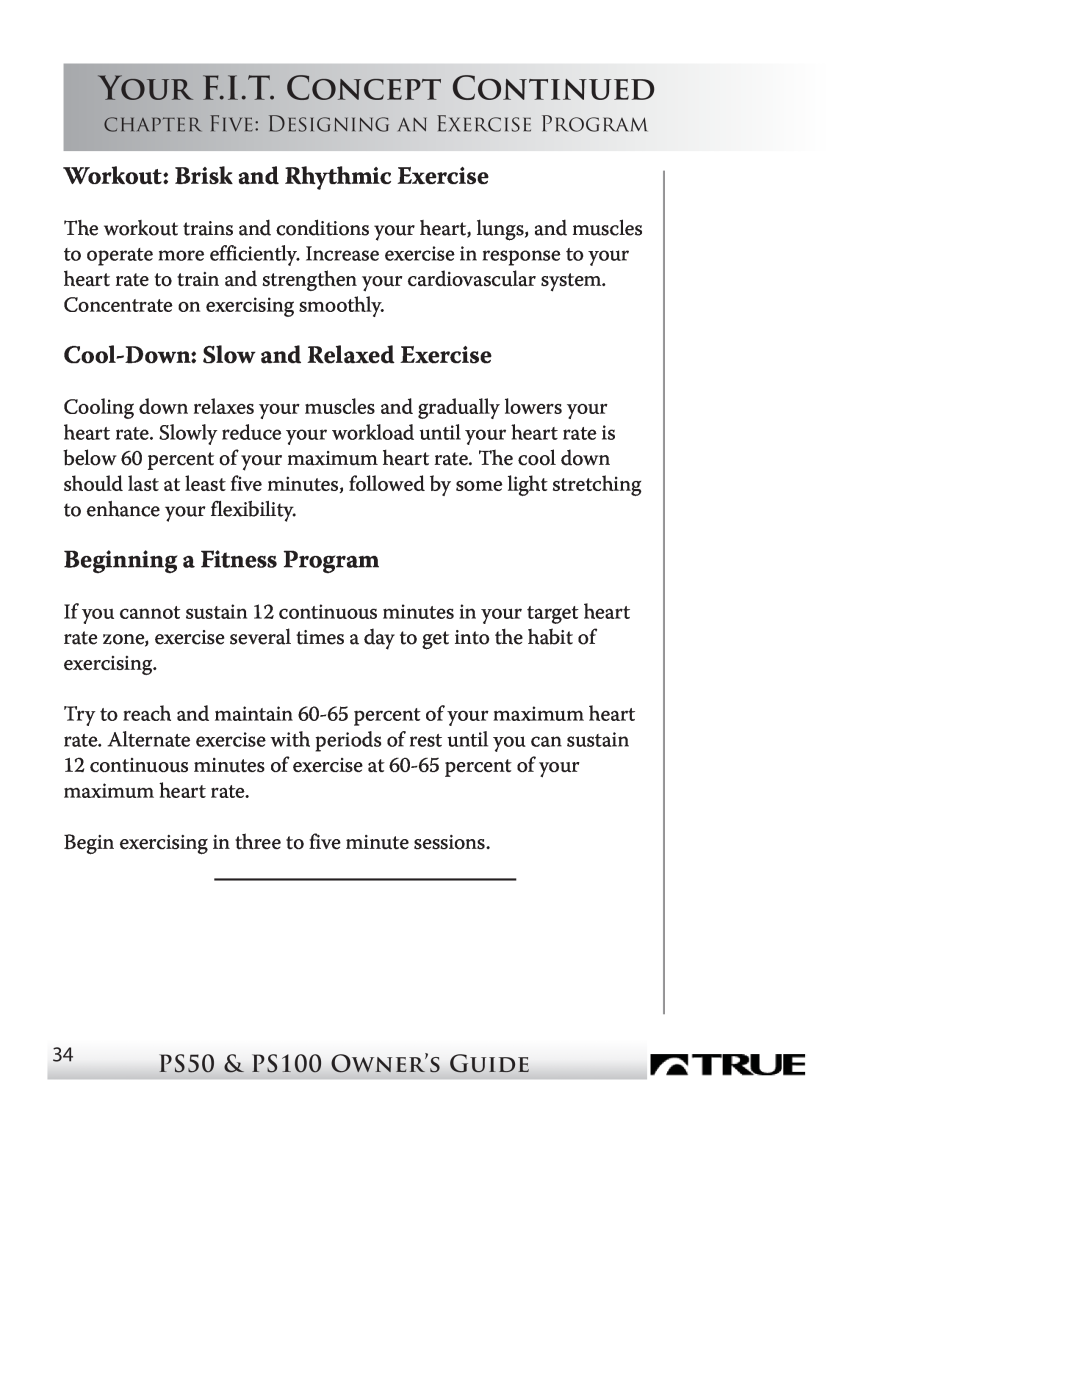 True Fitness PS50 Your F.I.T. Concept Continued, Workout Brisk and Rhythmic Exercise, Cool-Down Slow and Relaxed Exercise 